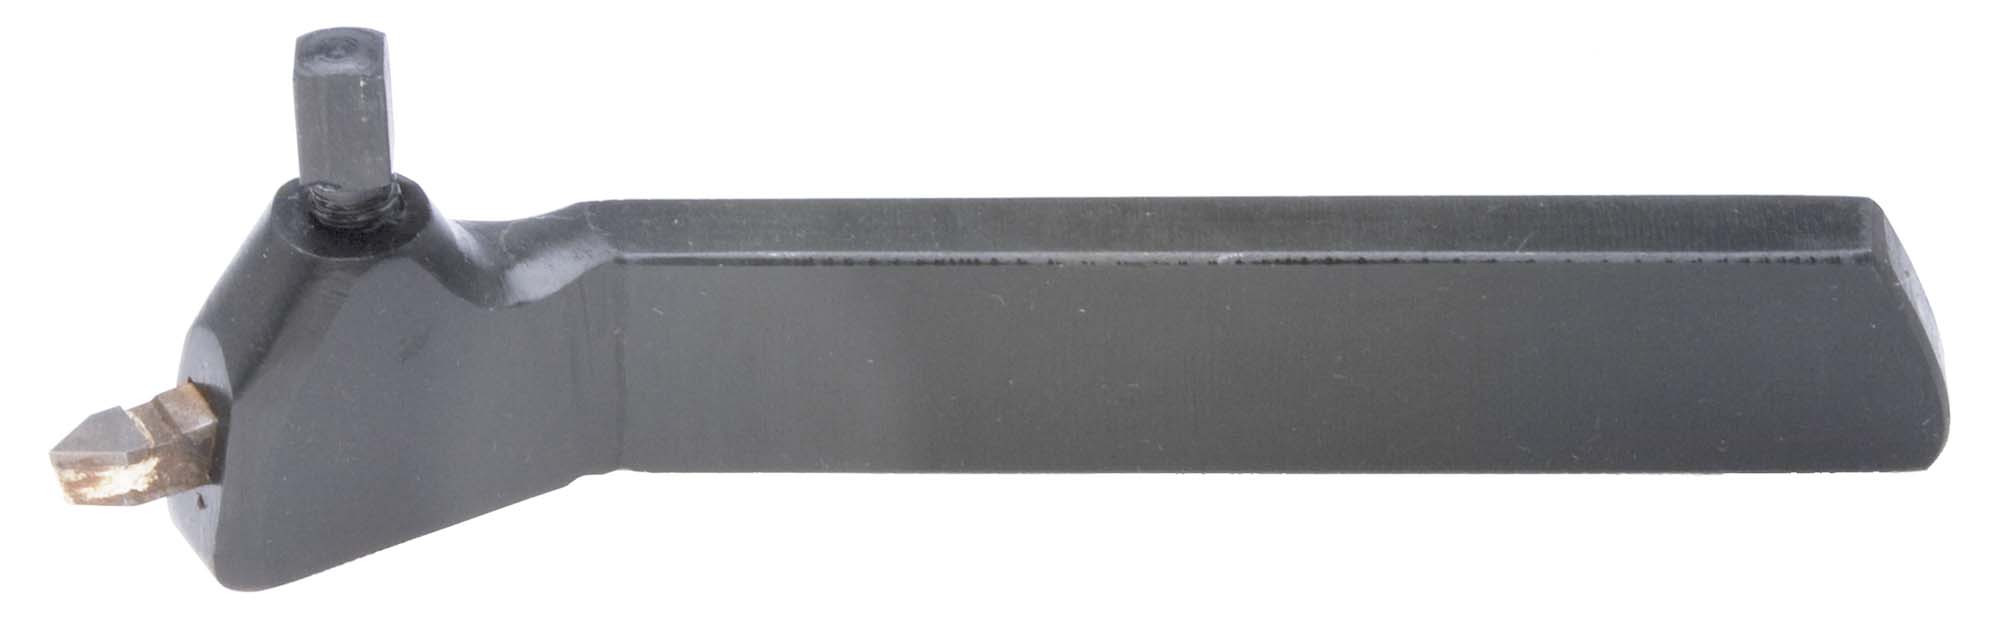 7/8 X 1-3/4 Right Hand Lathe Tool Holder for 1/2" Carbide Tip Toolbits